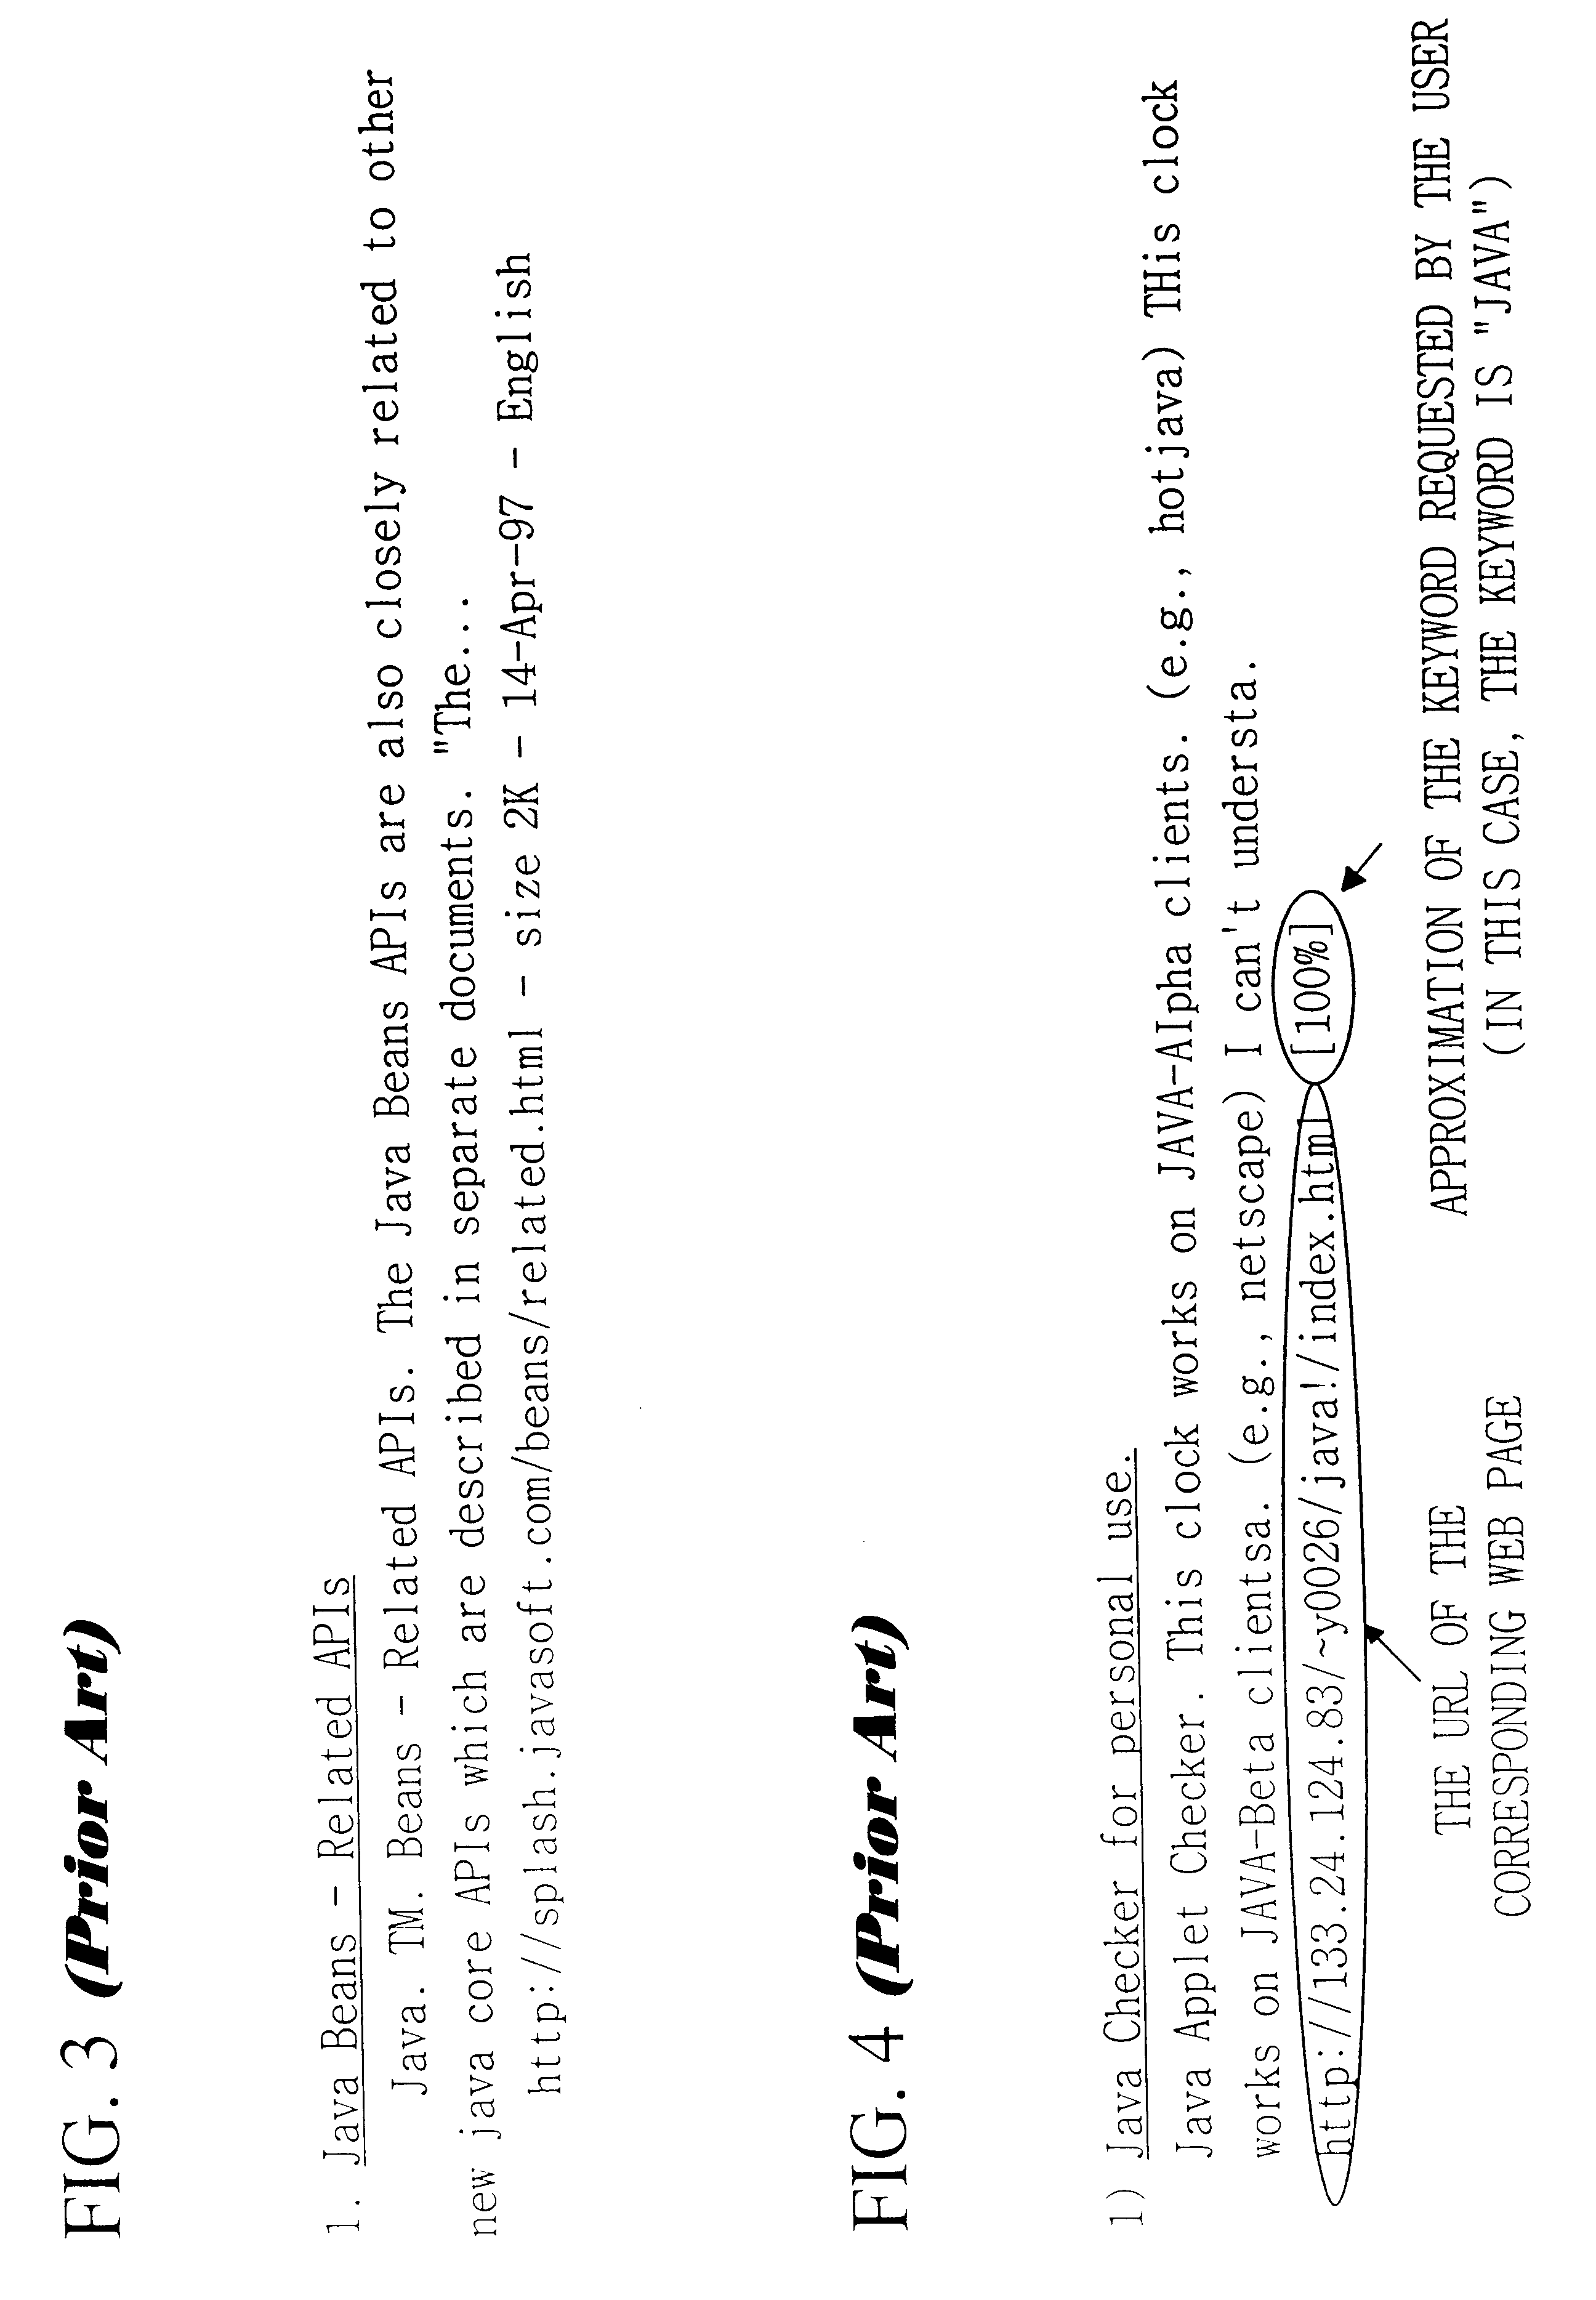 Method for displaying internet search results